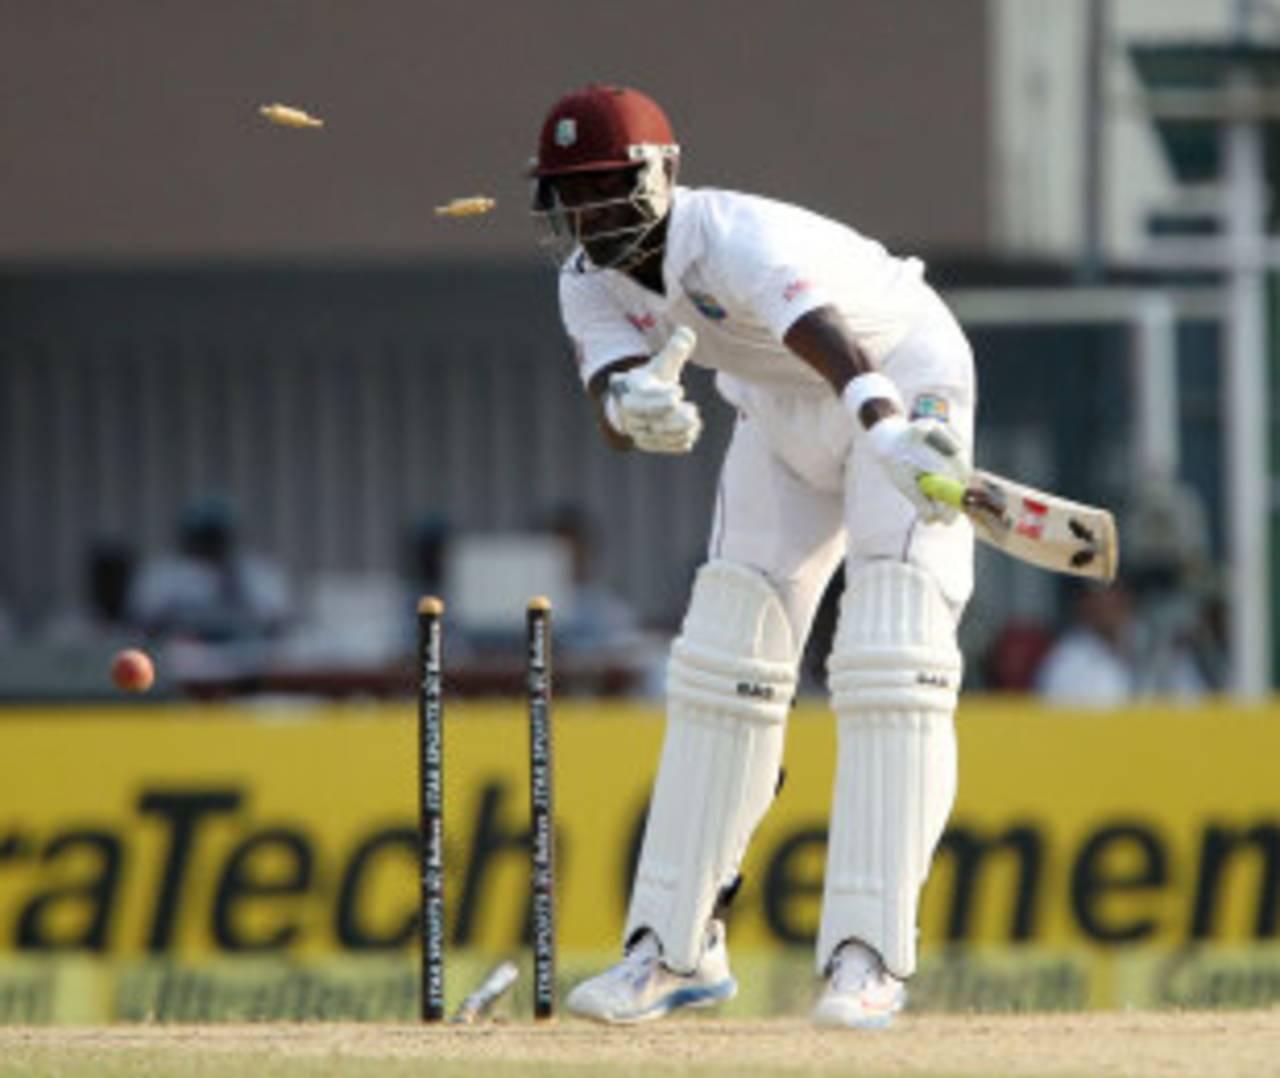 The selectors need to consider Darren Sammy's future in the West Indies Test team, says Clive Lloyd&nbsp;&nbsp;&bull;&nbsp;&nbsp;BCCI